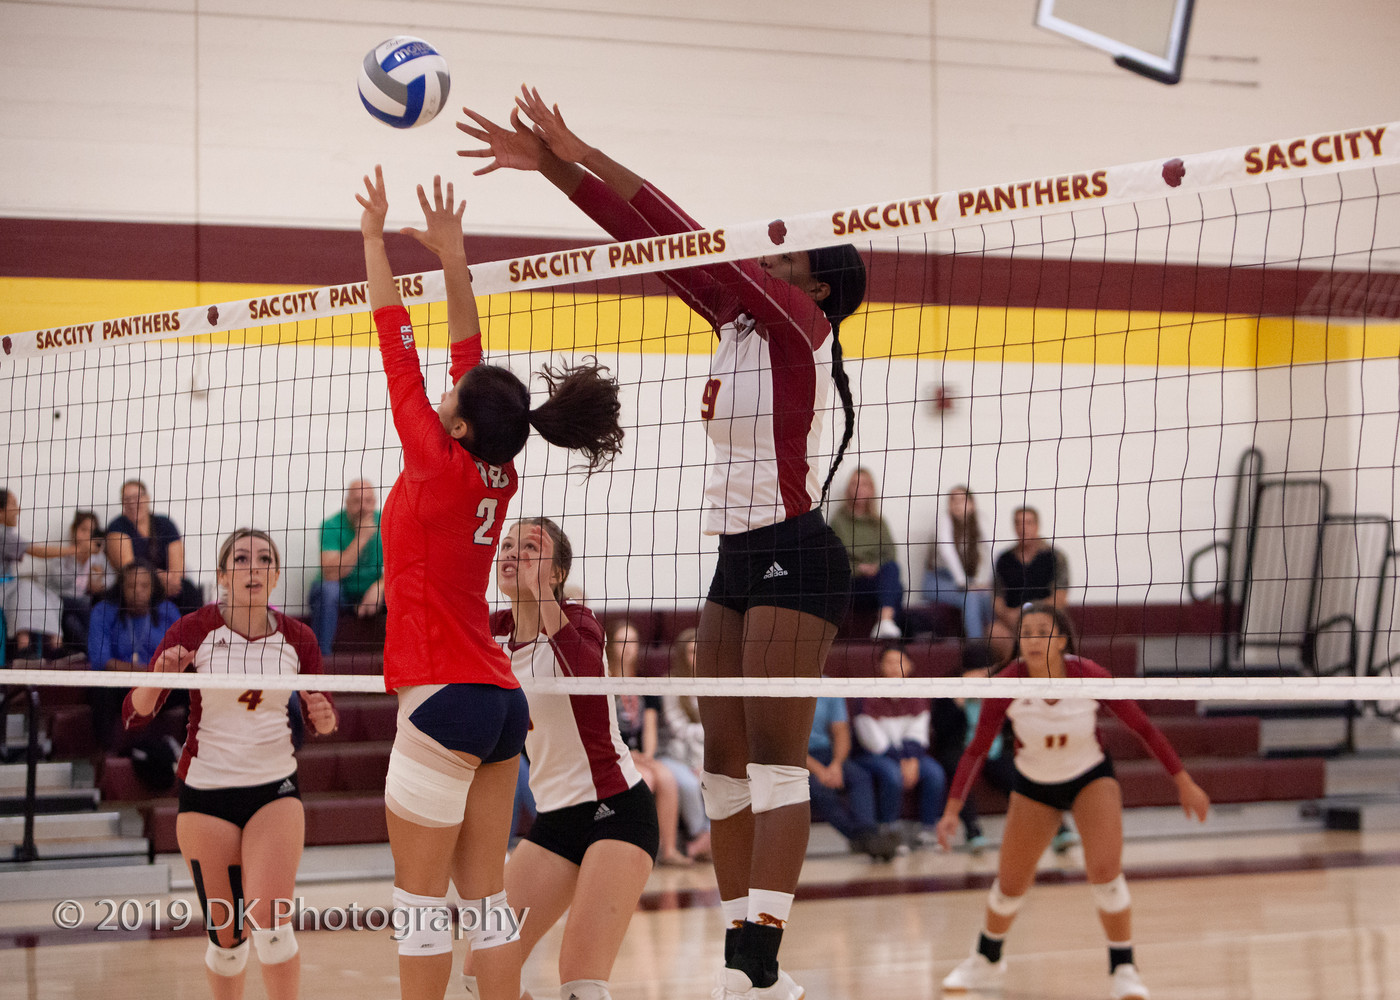 Jaylah Tate (#9), City College sophomore goes up for the block in the match against American River College in the North Gym on Oct. 4th.